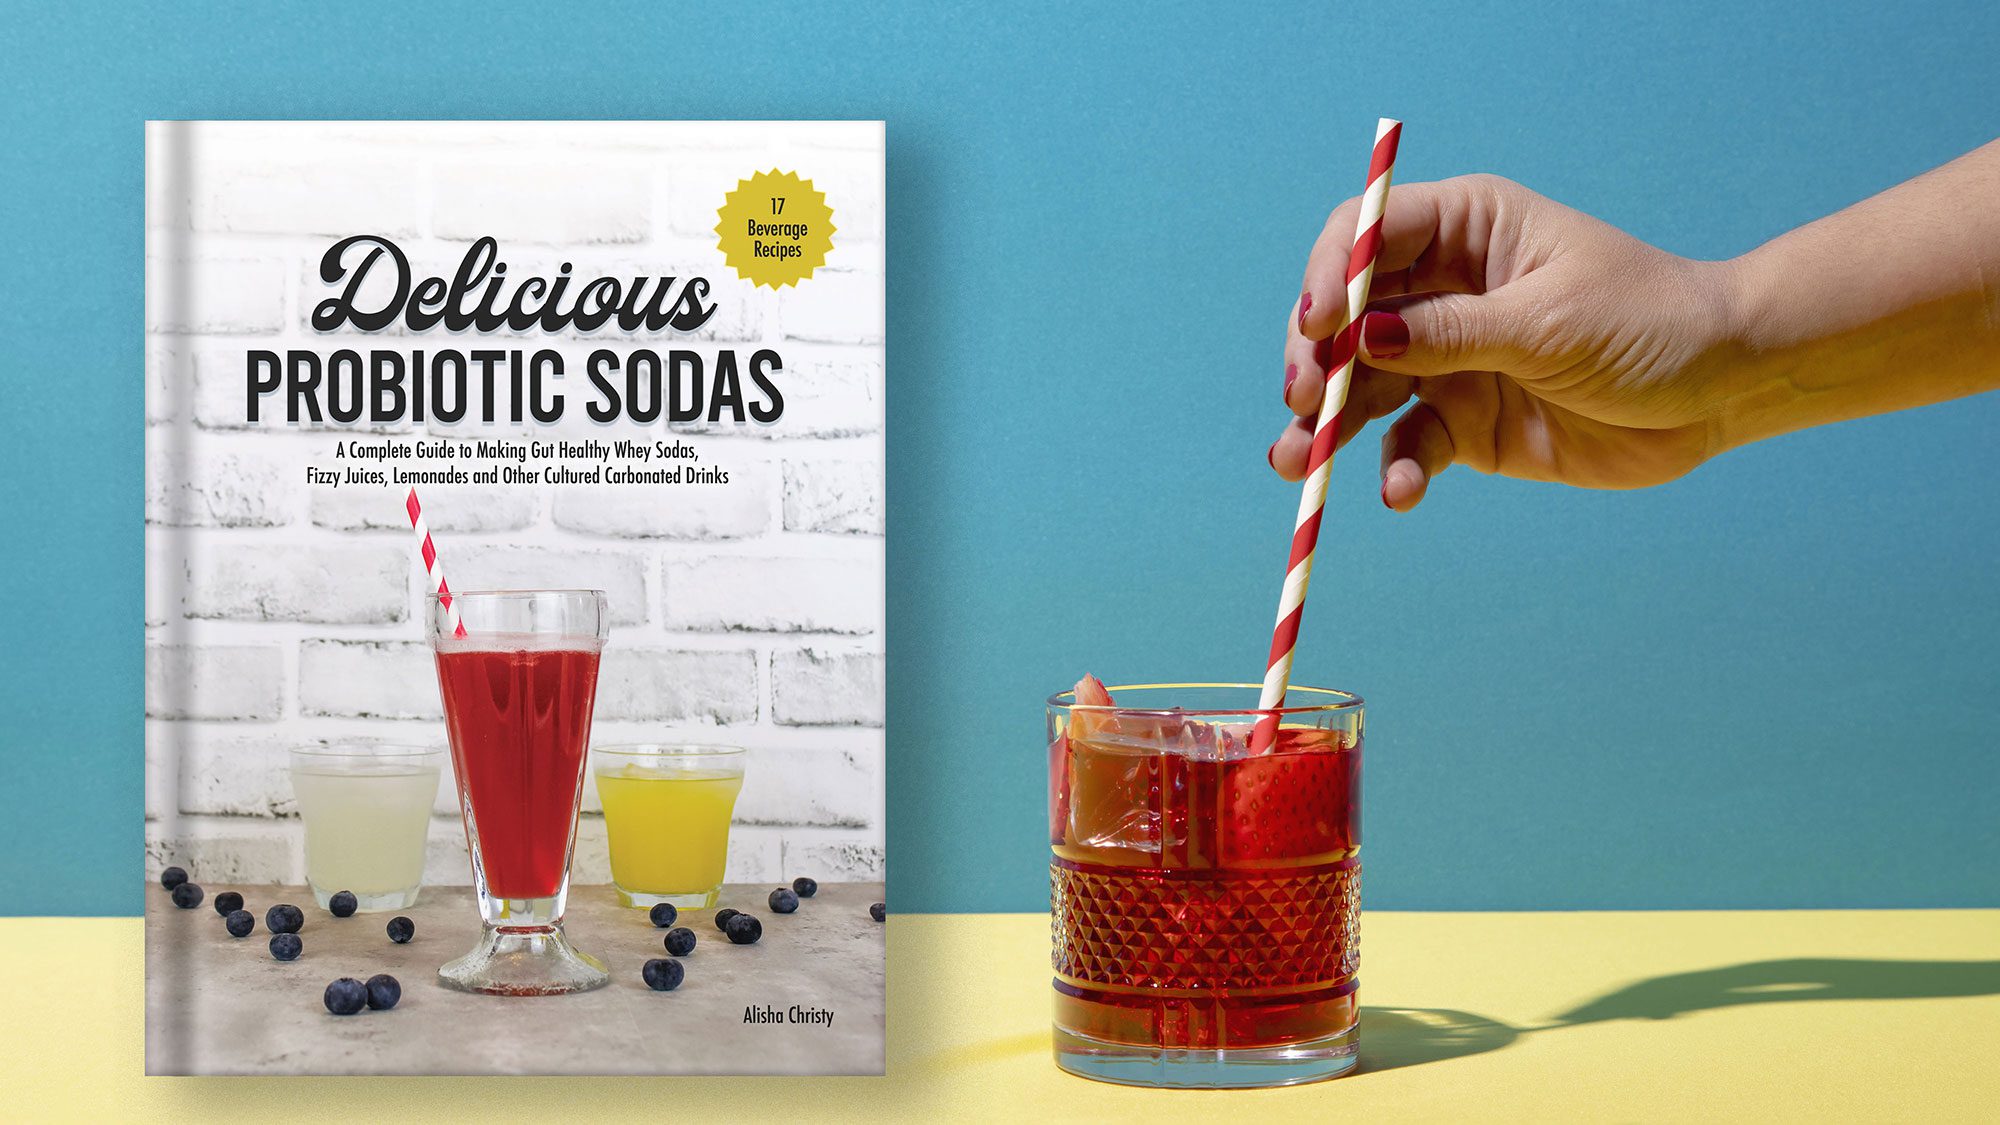 probiotic soda book sits next to a glass of strawberry soda with a red striped straw